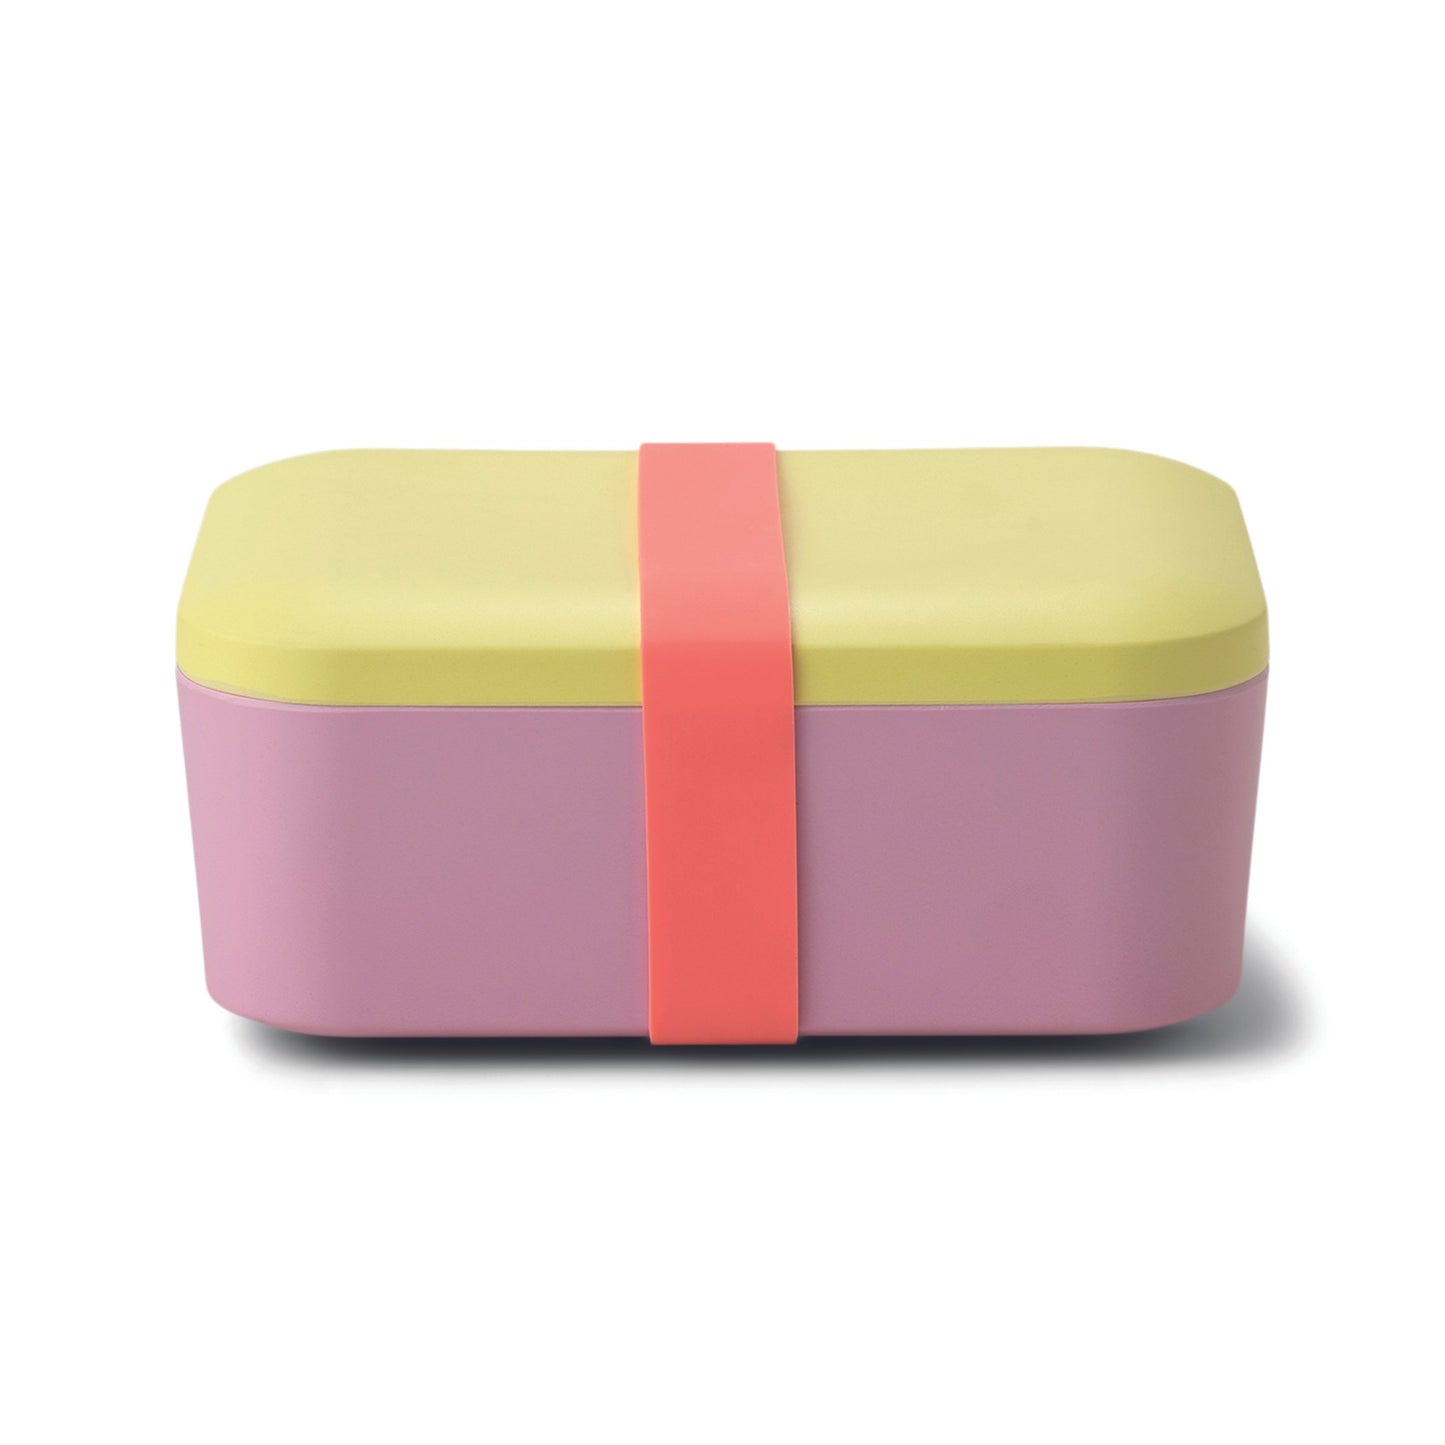 Melamine Lunch Box - Citron/Coral/Pink